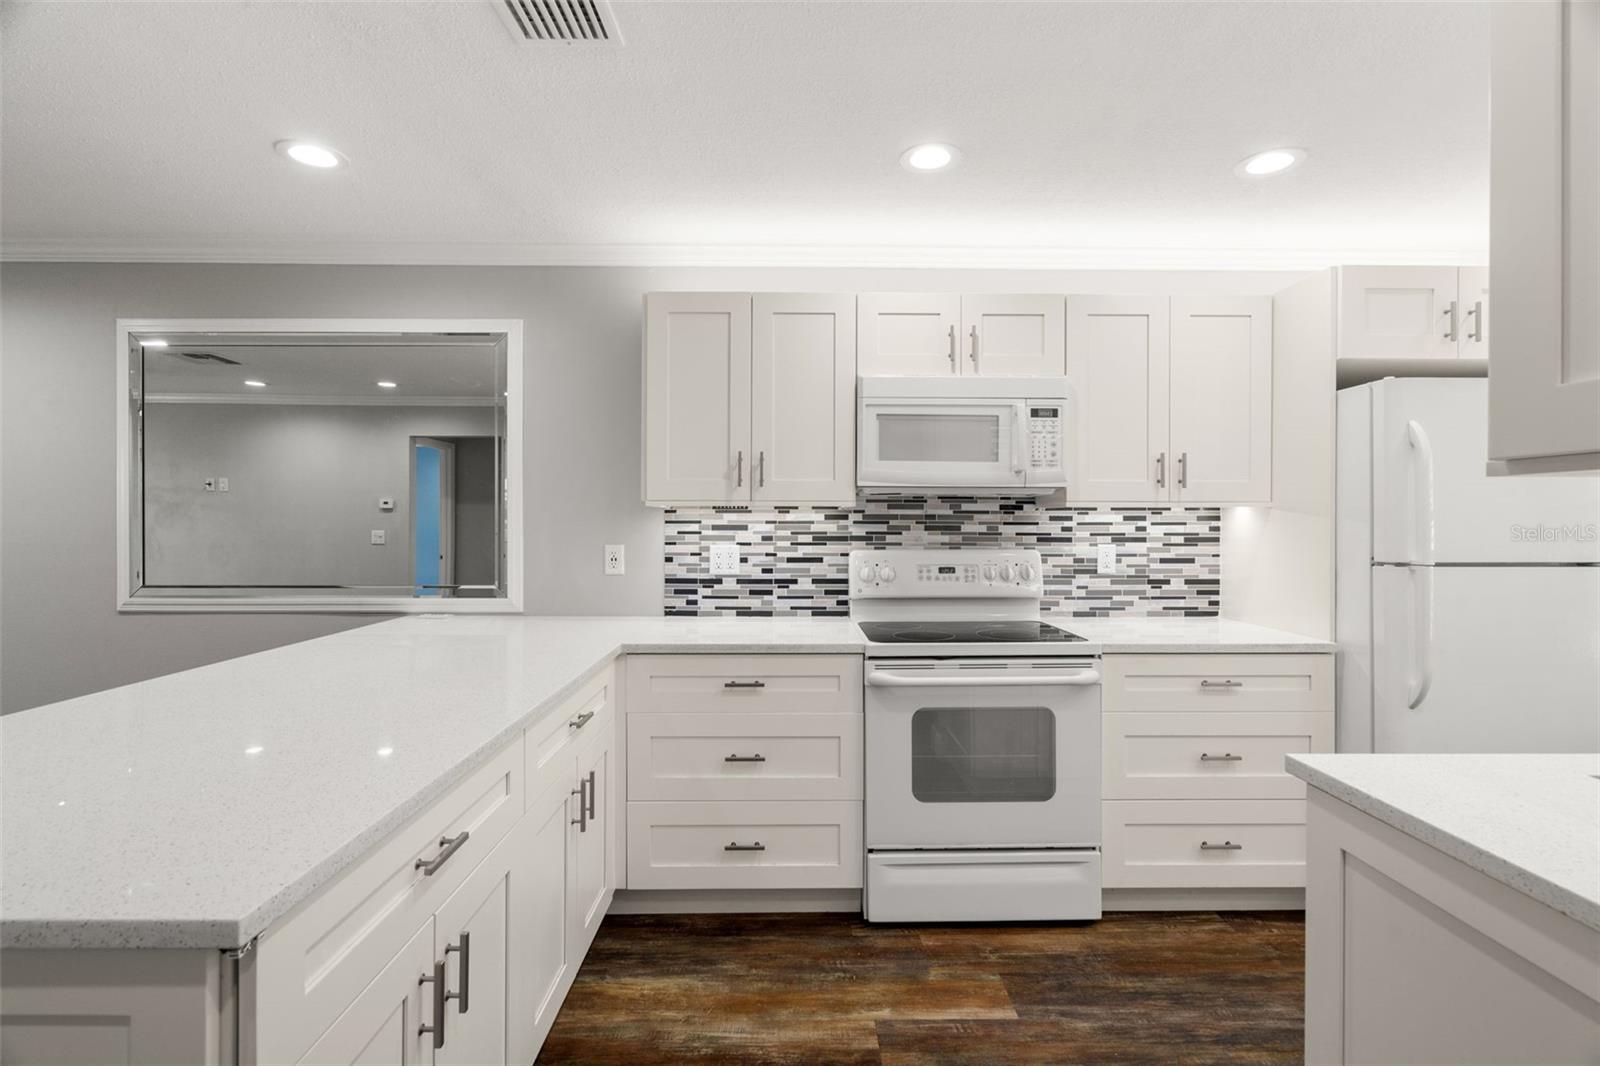 The fully updated kitchen features sleek shaker cabinets and a convenient layout of counters and appliances.